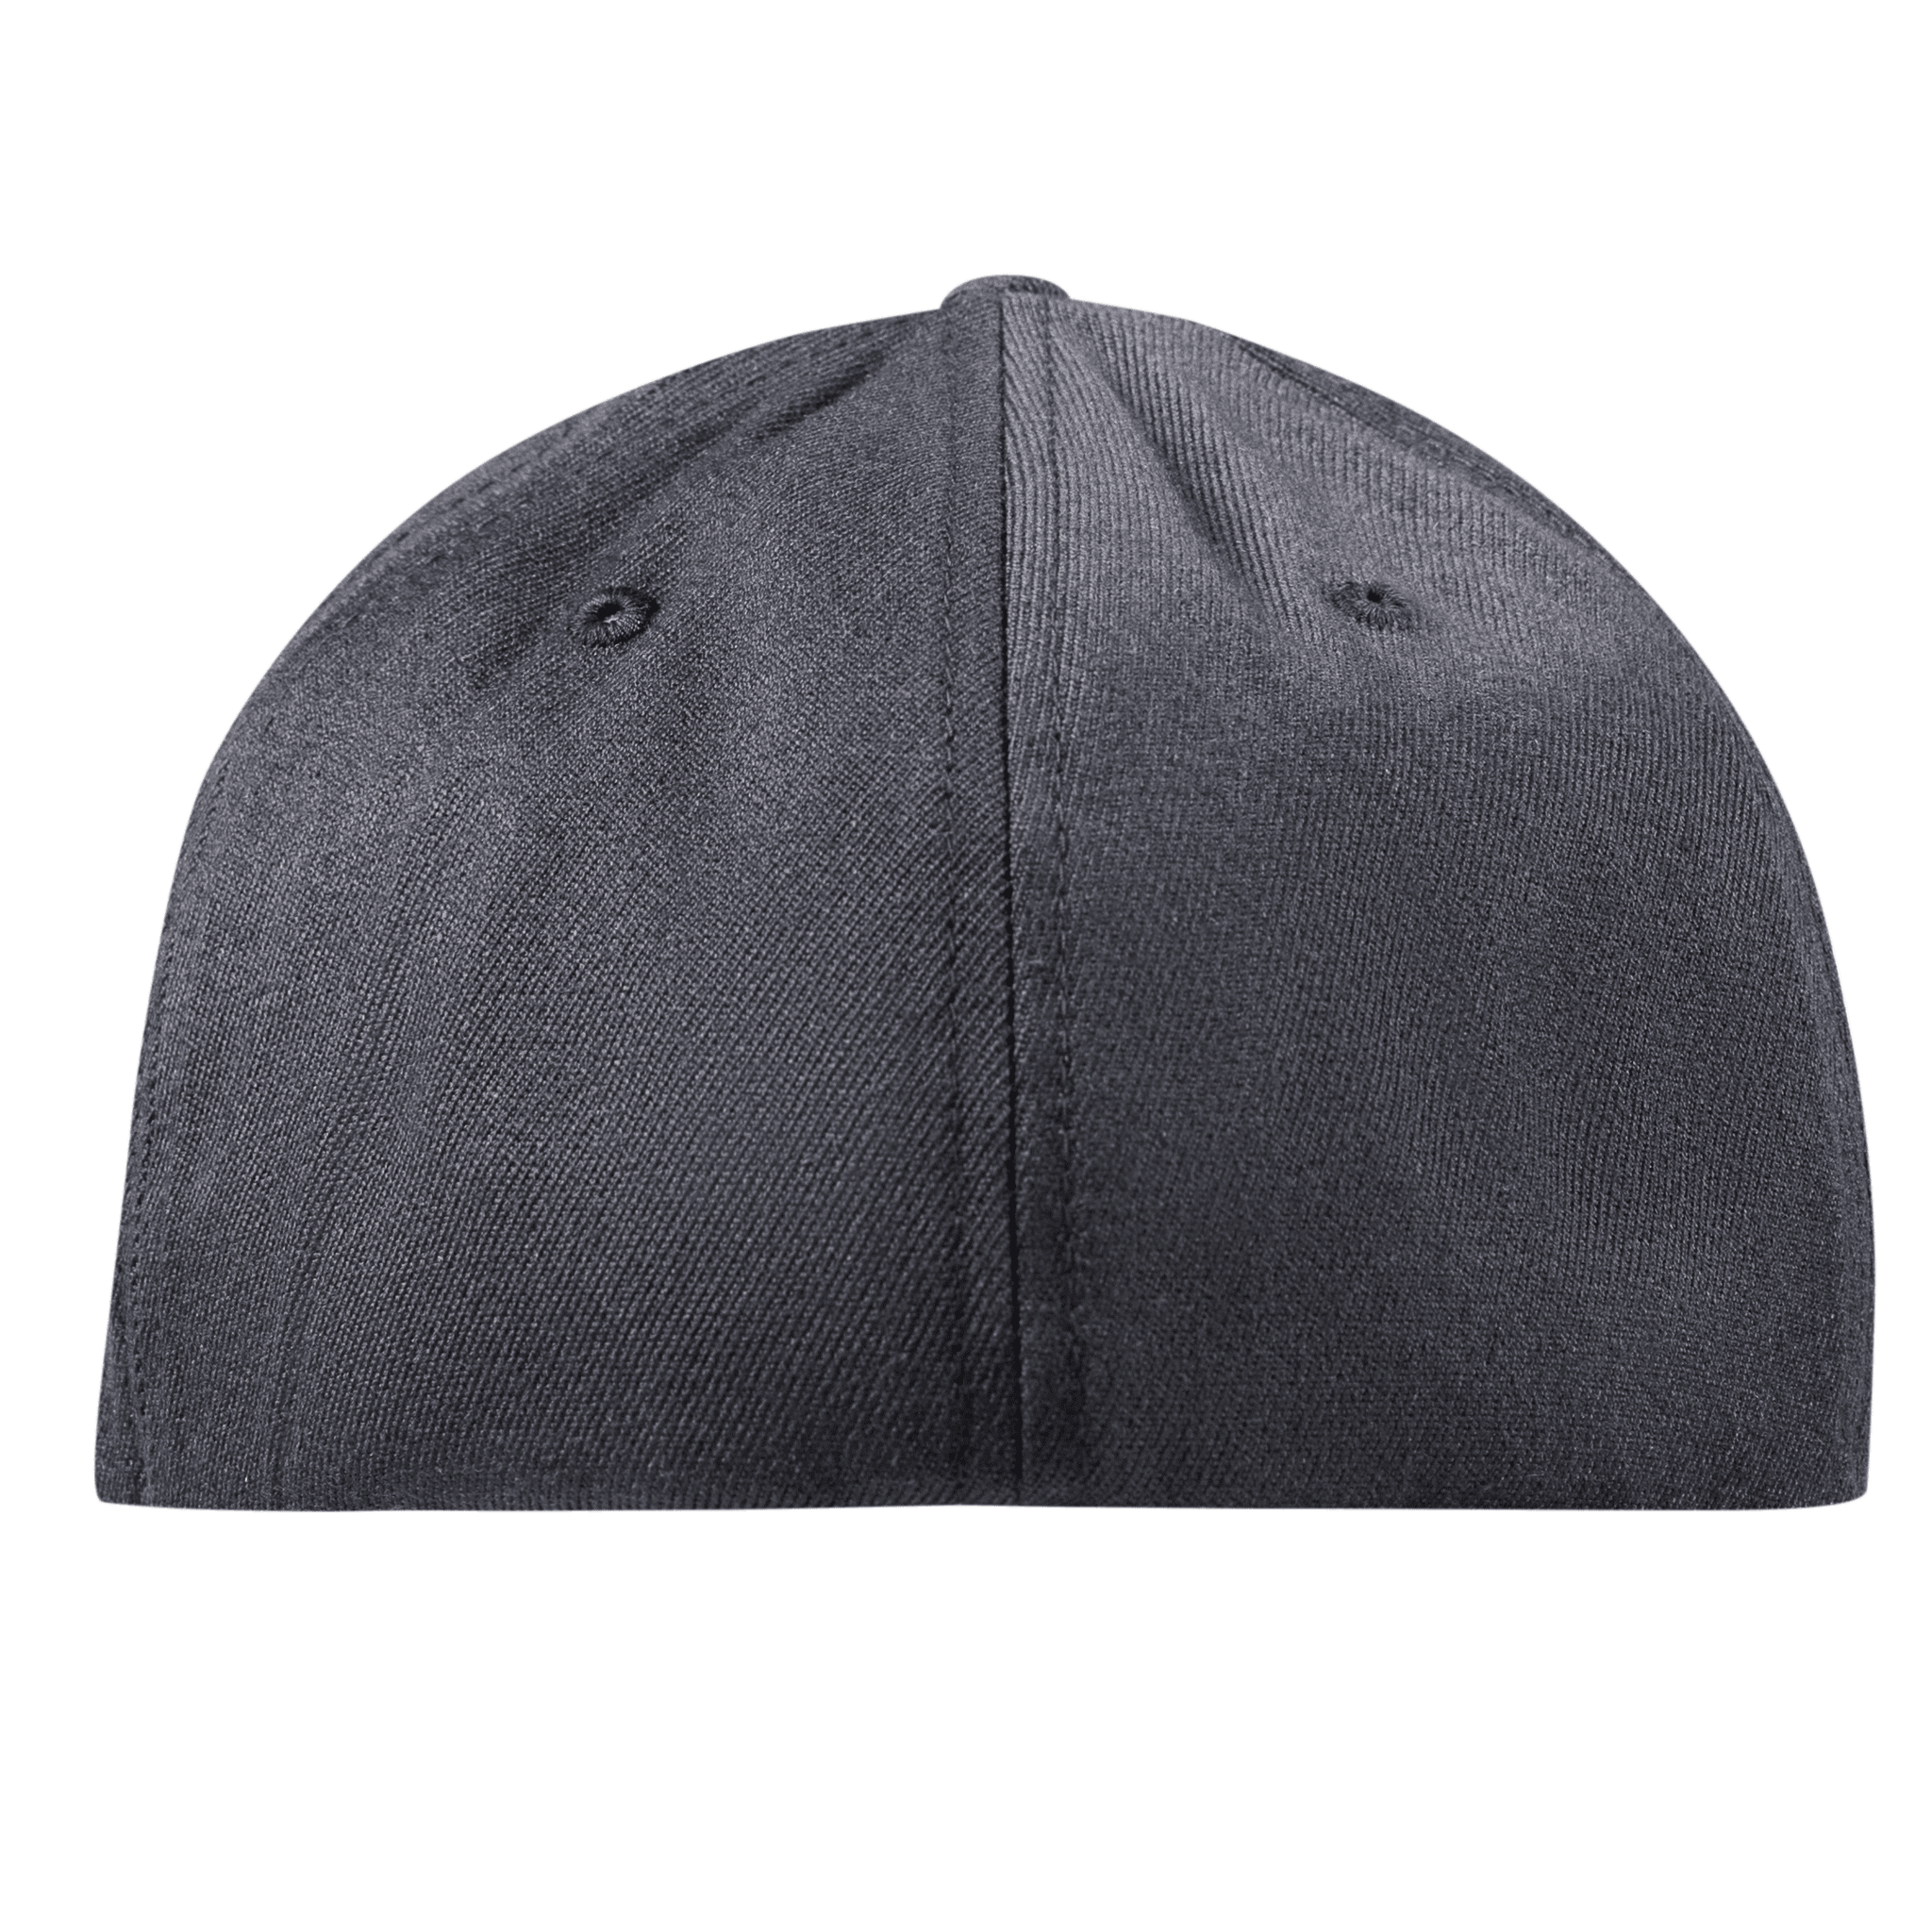 Wisconsin 30 Flexfit Fitted Back Charcoal